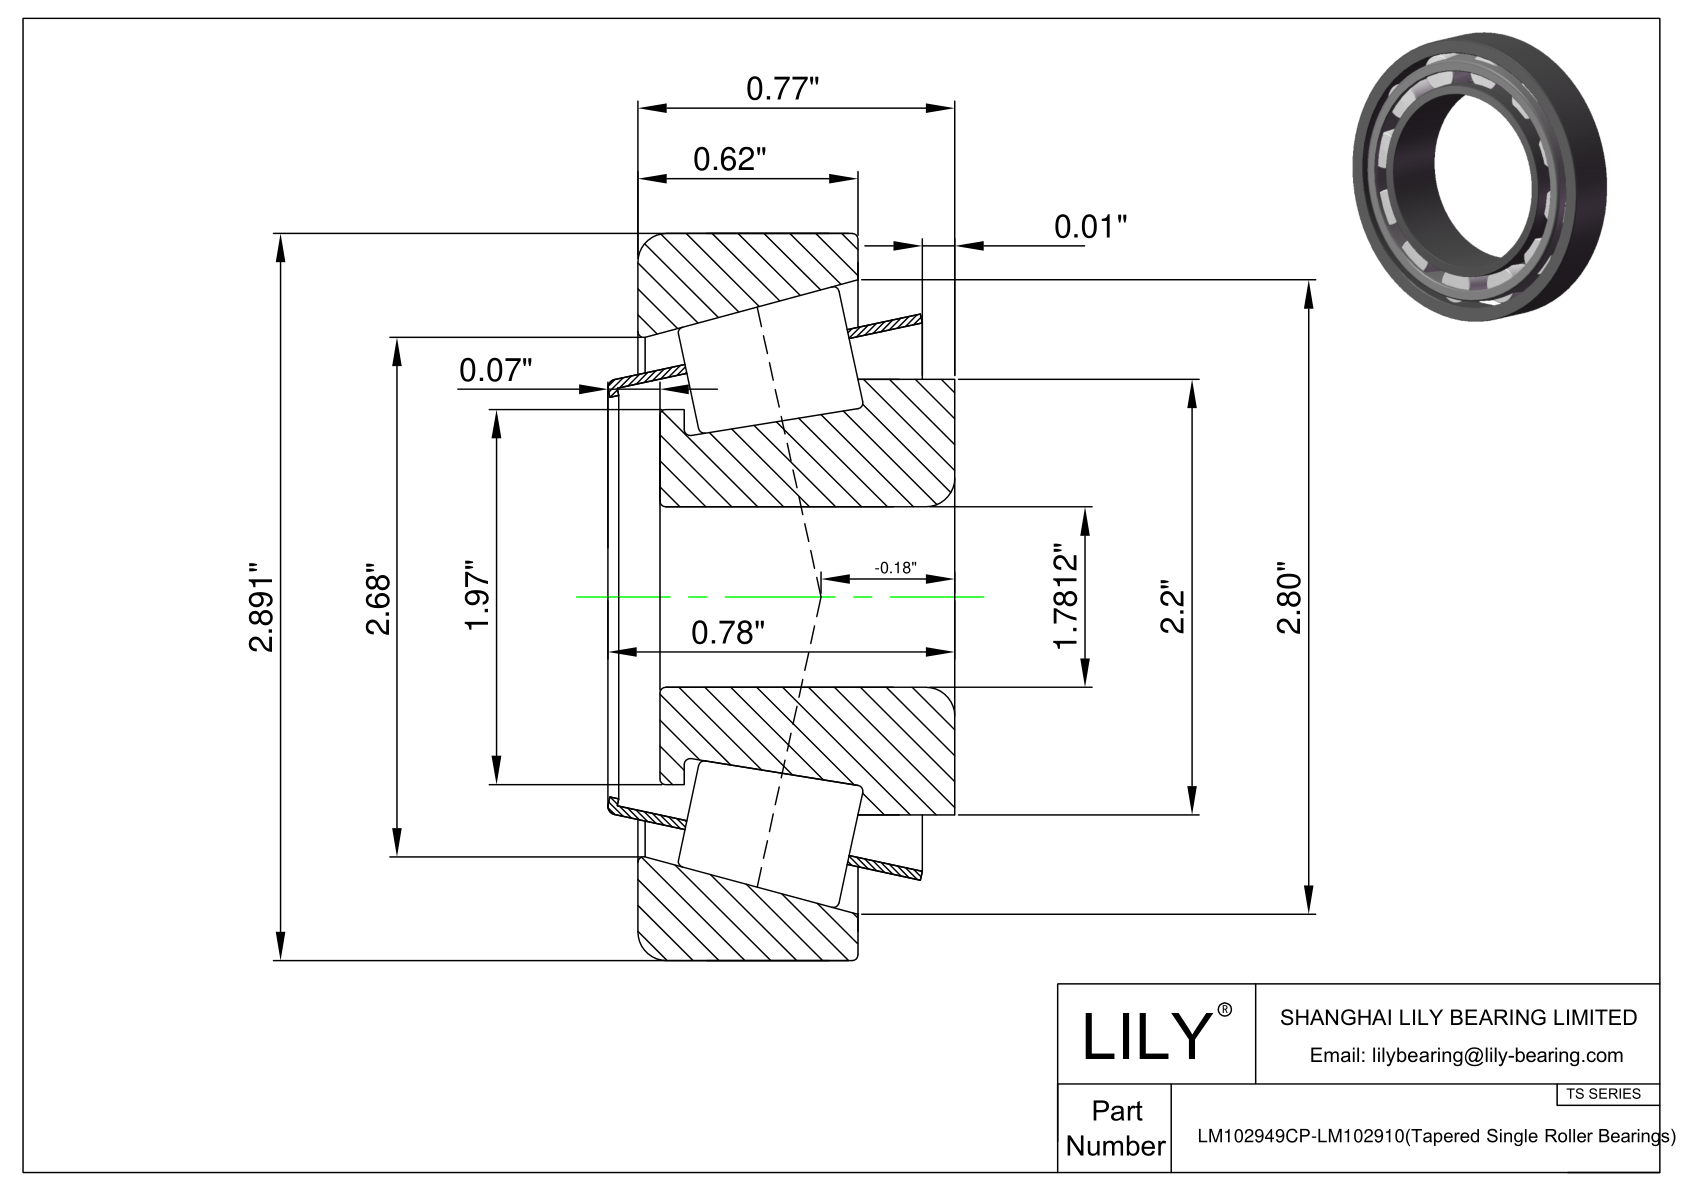 LM102949CP-LM102910 TS (Tapered Single Roller Bearings) (Imperial) cad drawing